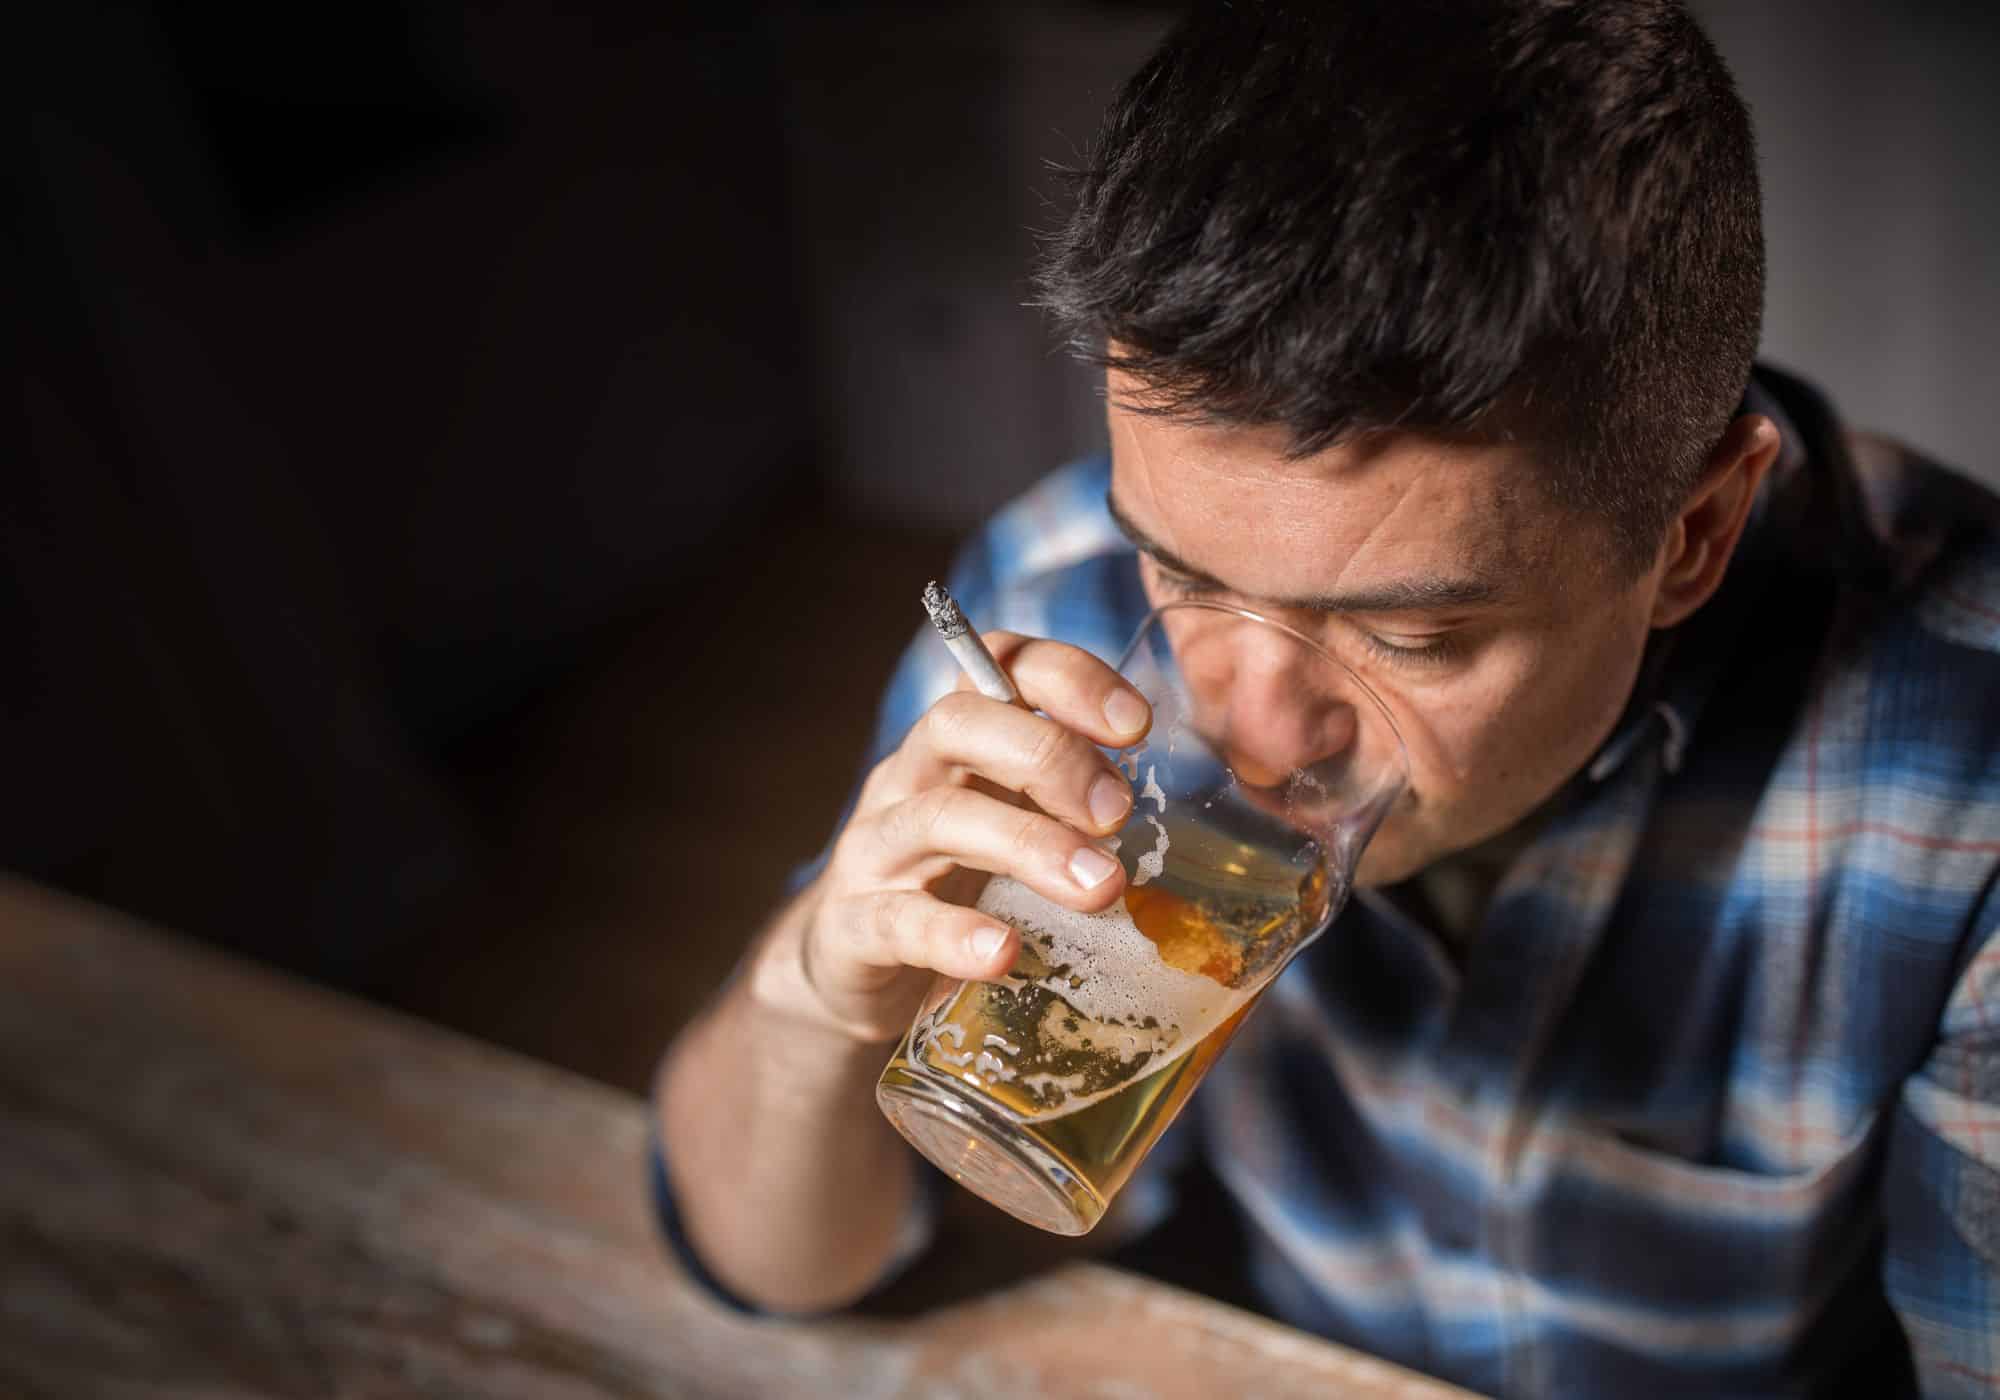 Is My Husband a Functioning Alcoholic?